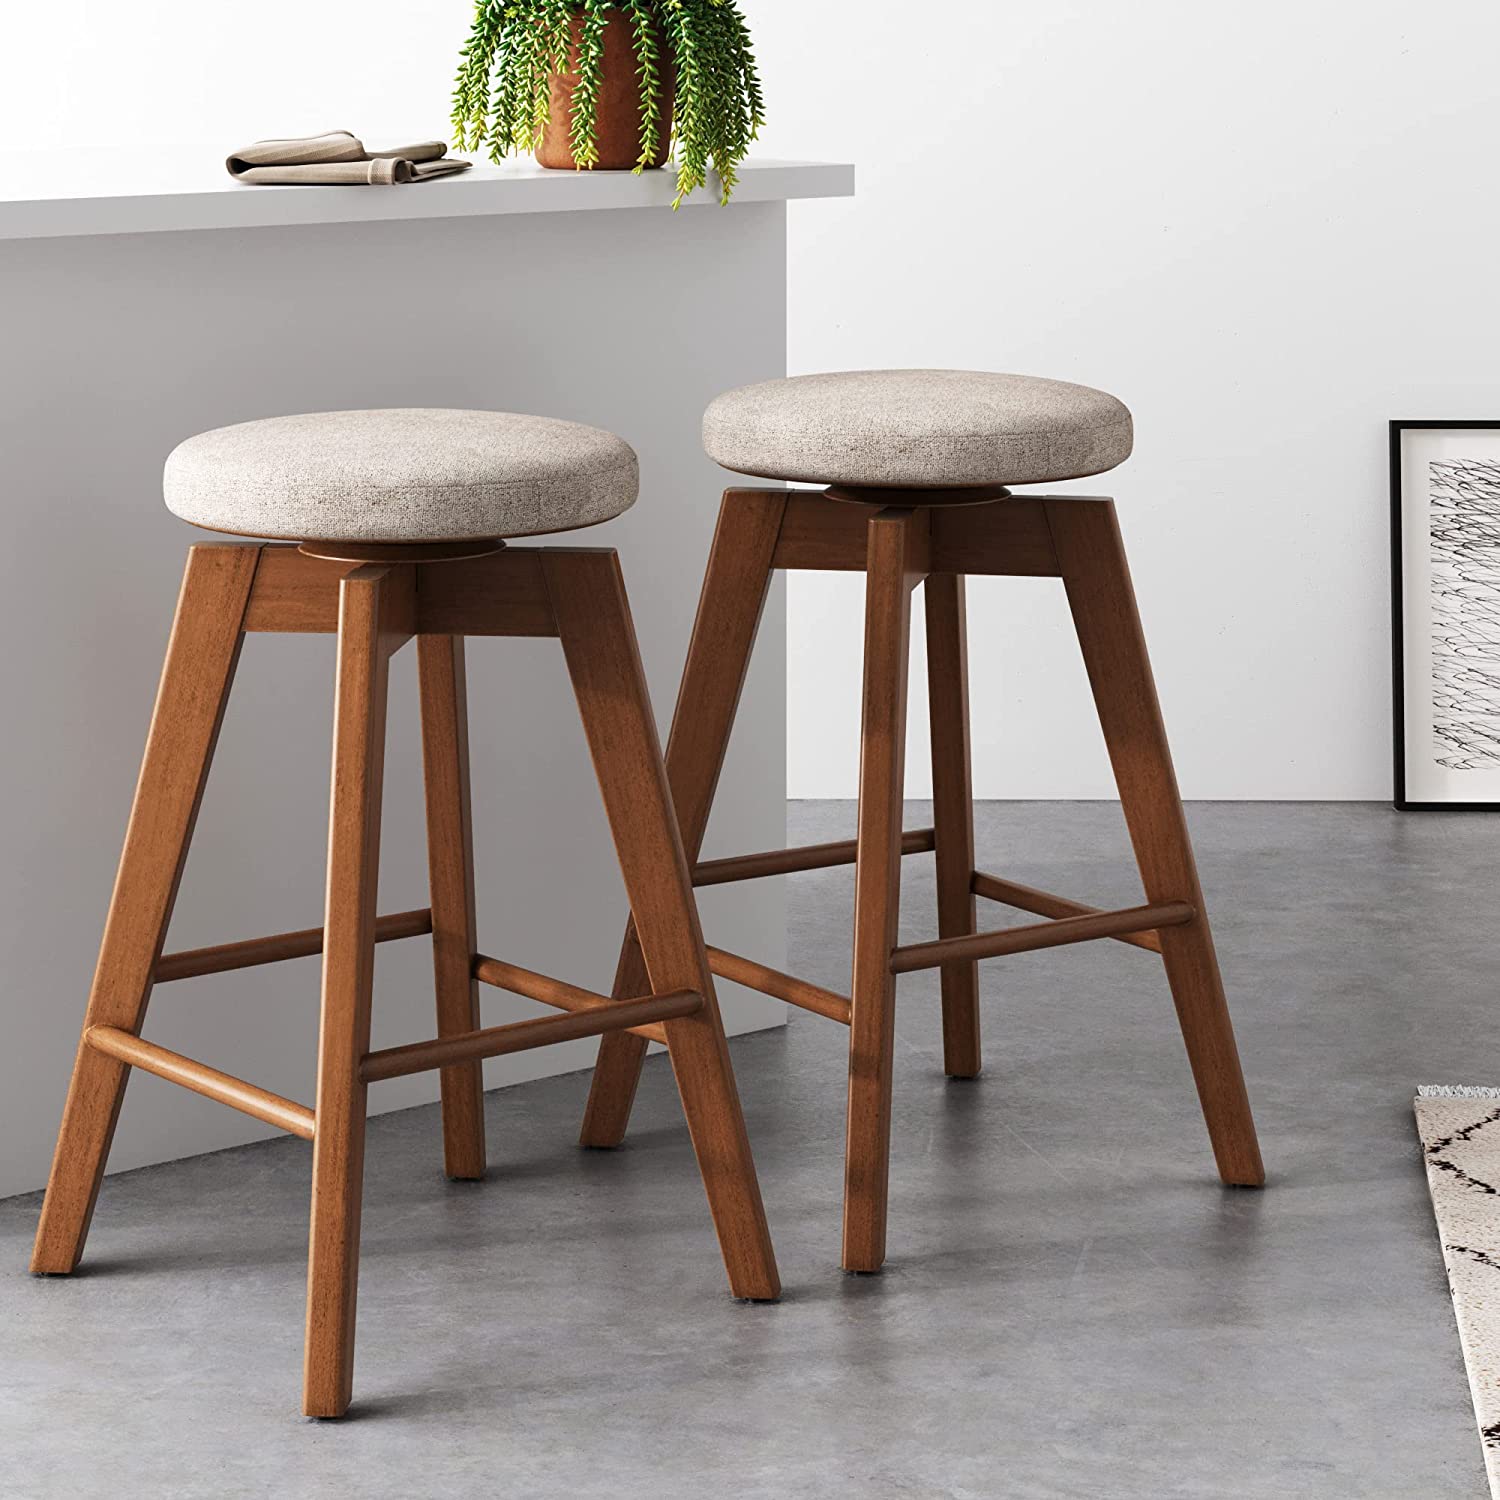 cheap upholstered bar stools swivel backless seat versatile kitchen seating ideas for counter height dining table design ideas mid century modern stylish fabric